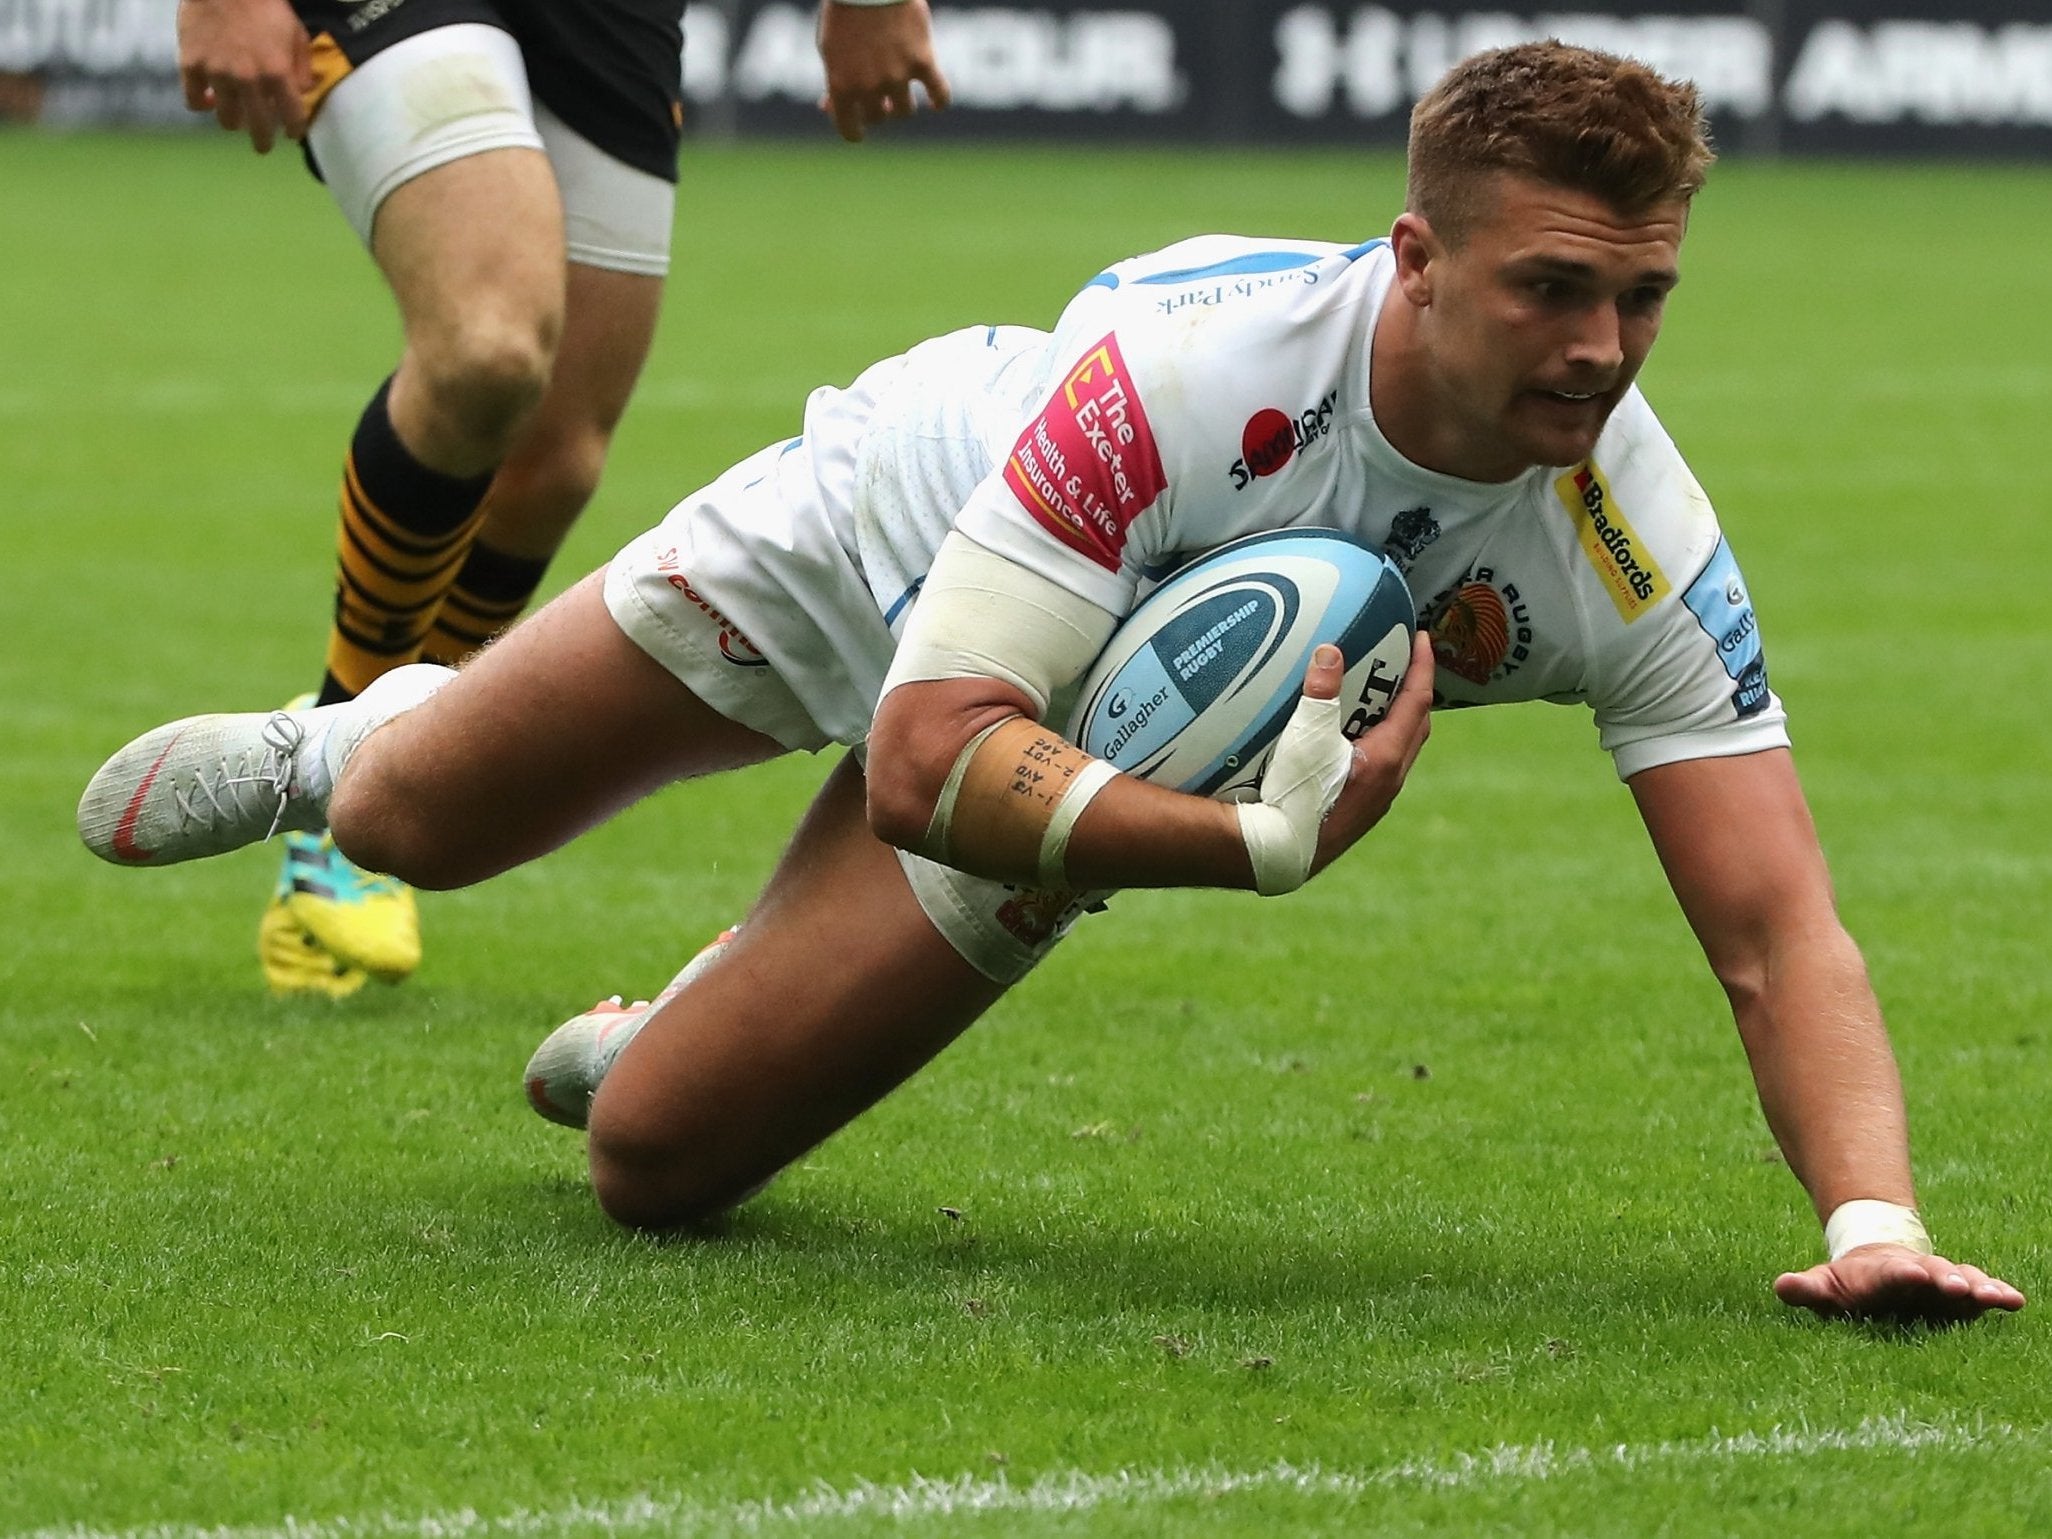 Henry Slade dives over to score a try in Exeter's victory over Wasps